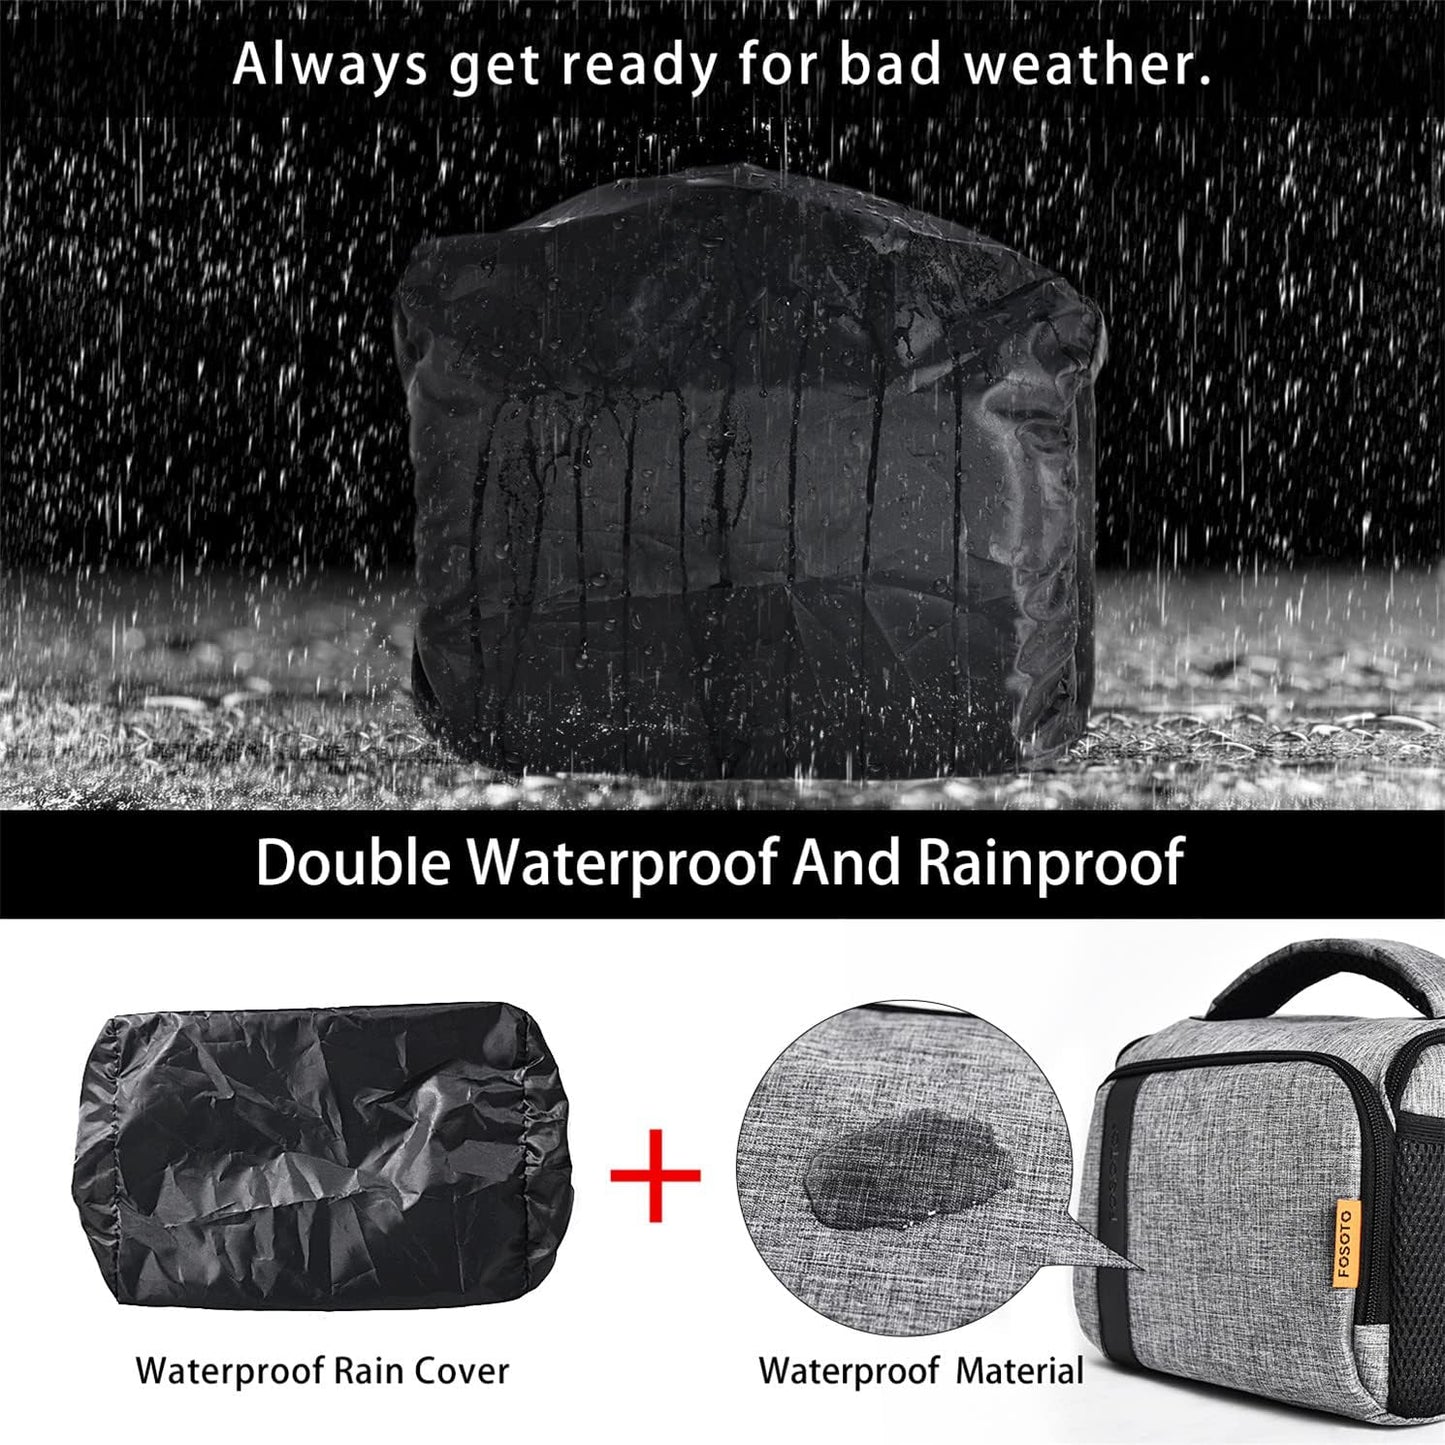 FOSOTO Waterproof DSLR Camera Bag Case,Shockproof Large Camera Lenses bags Compatible for Canon Rebel T7 2000D 4000D 700D 850D,Nikon D3500 D5600 D7500,Sony Photography Cases with Insert and Rain Cover